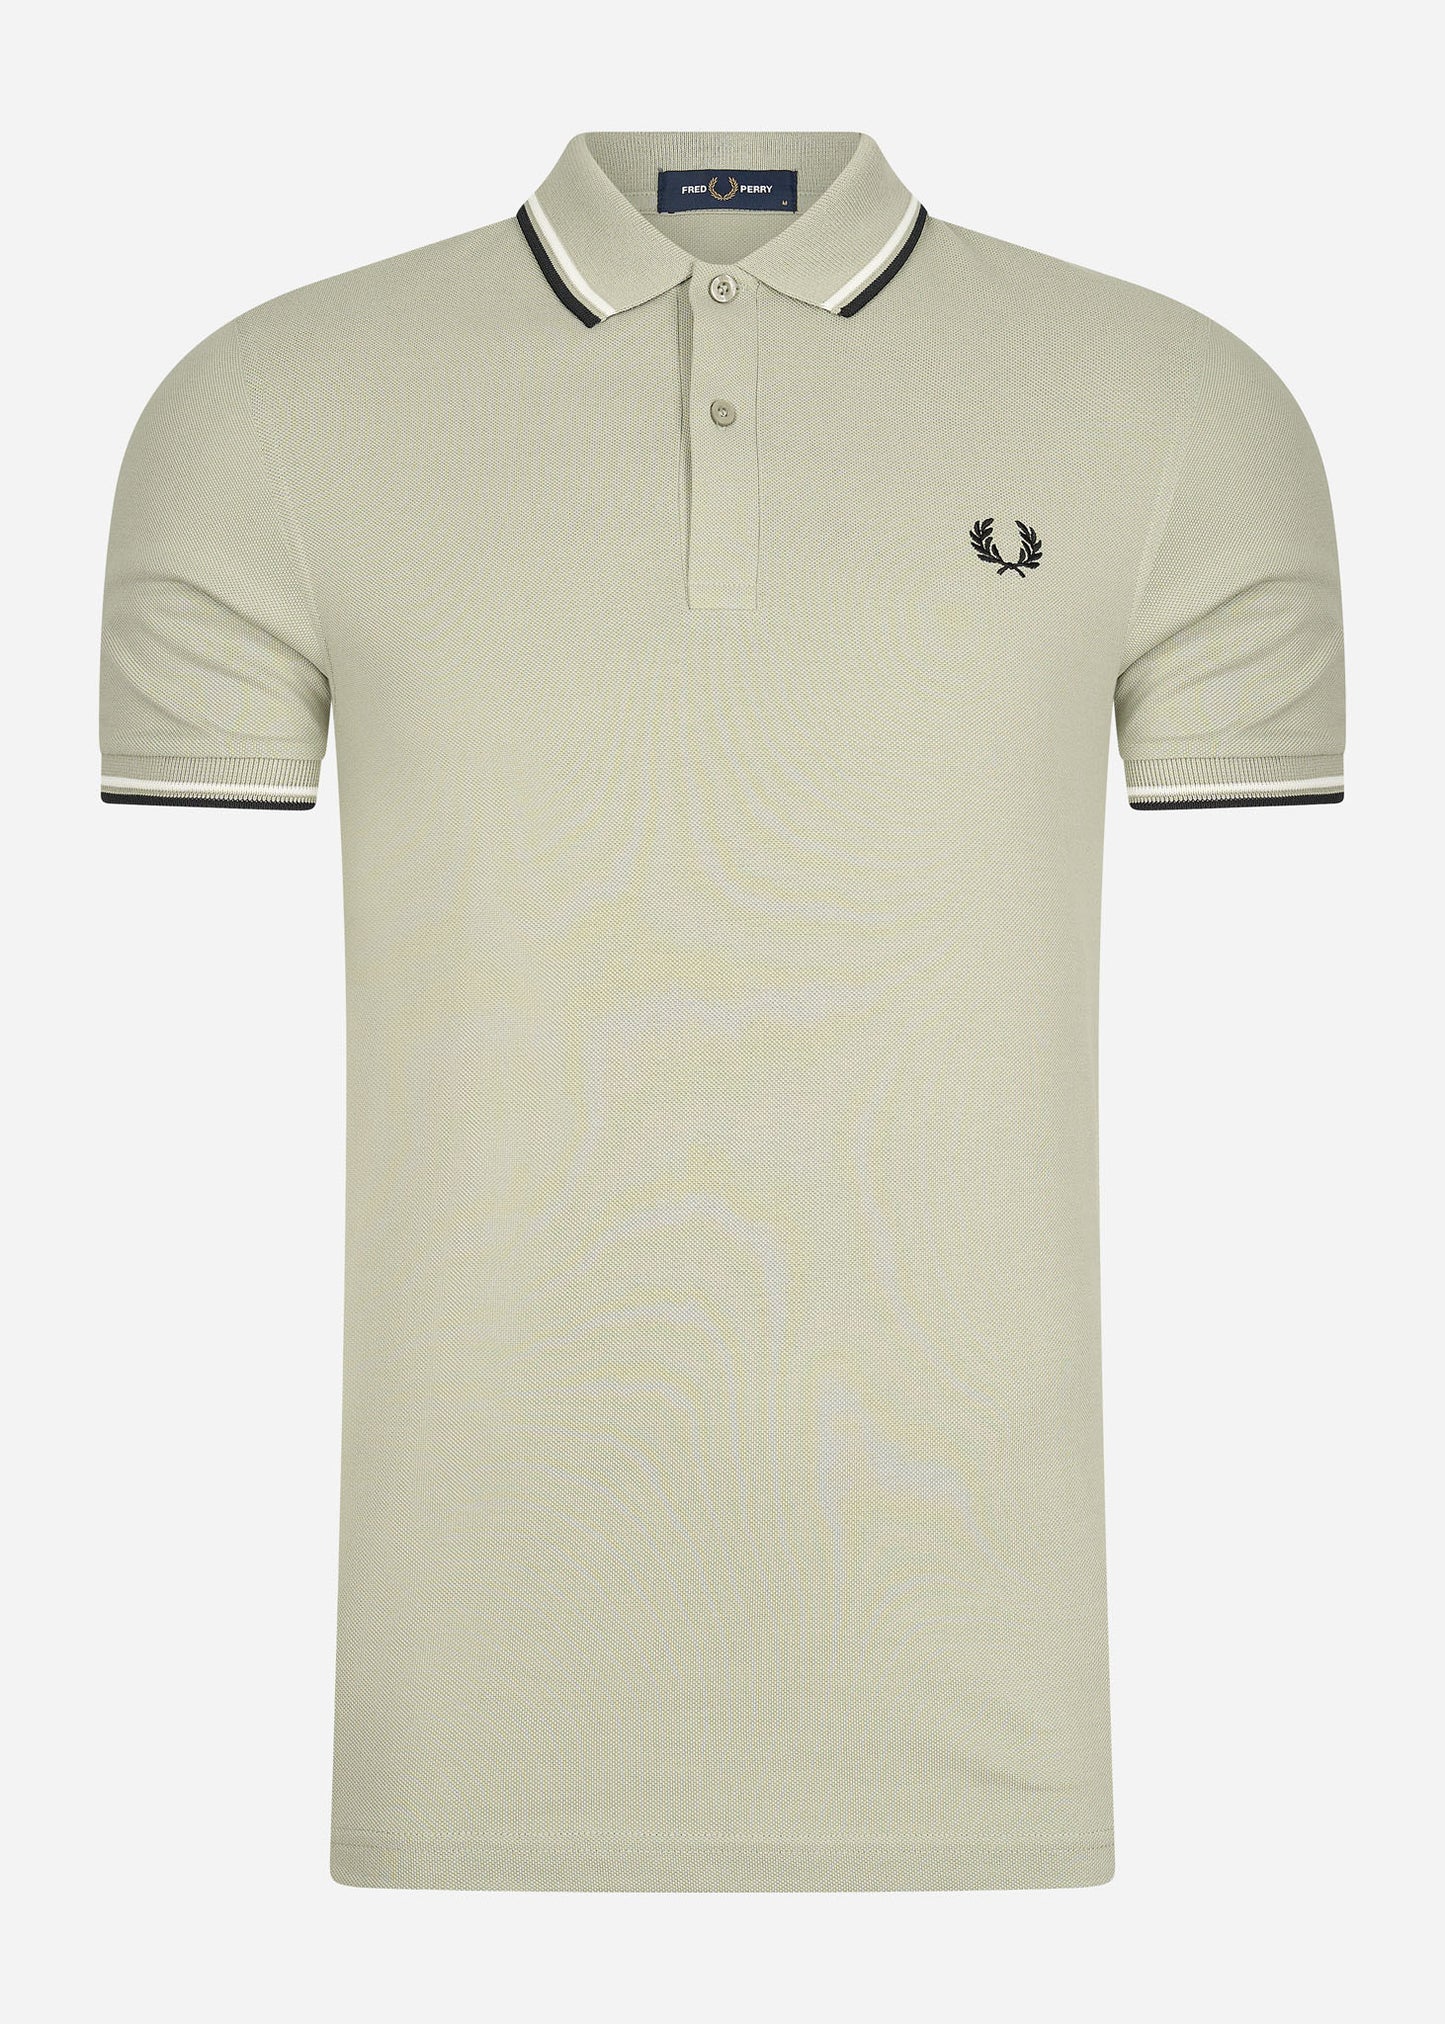 Twin tipped fred perry shirt - seagrass snow white black